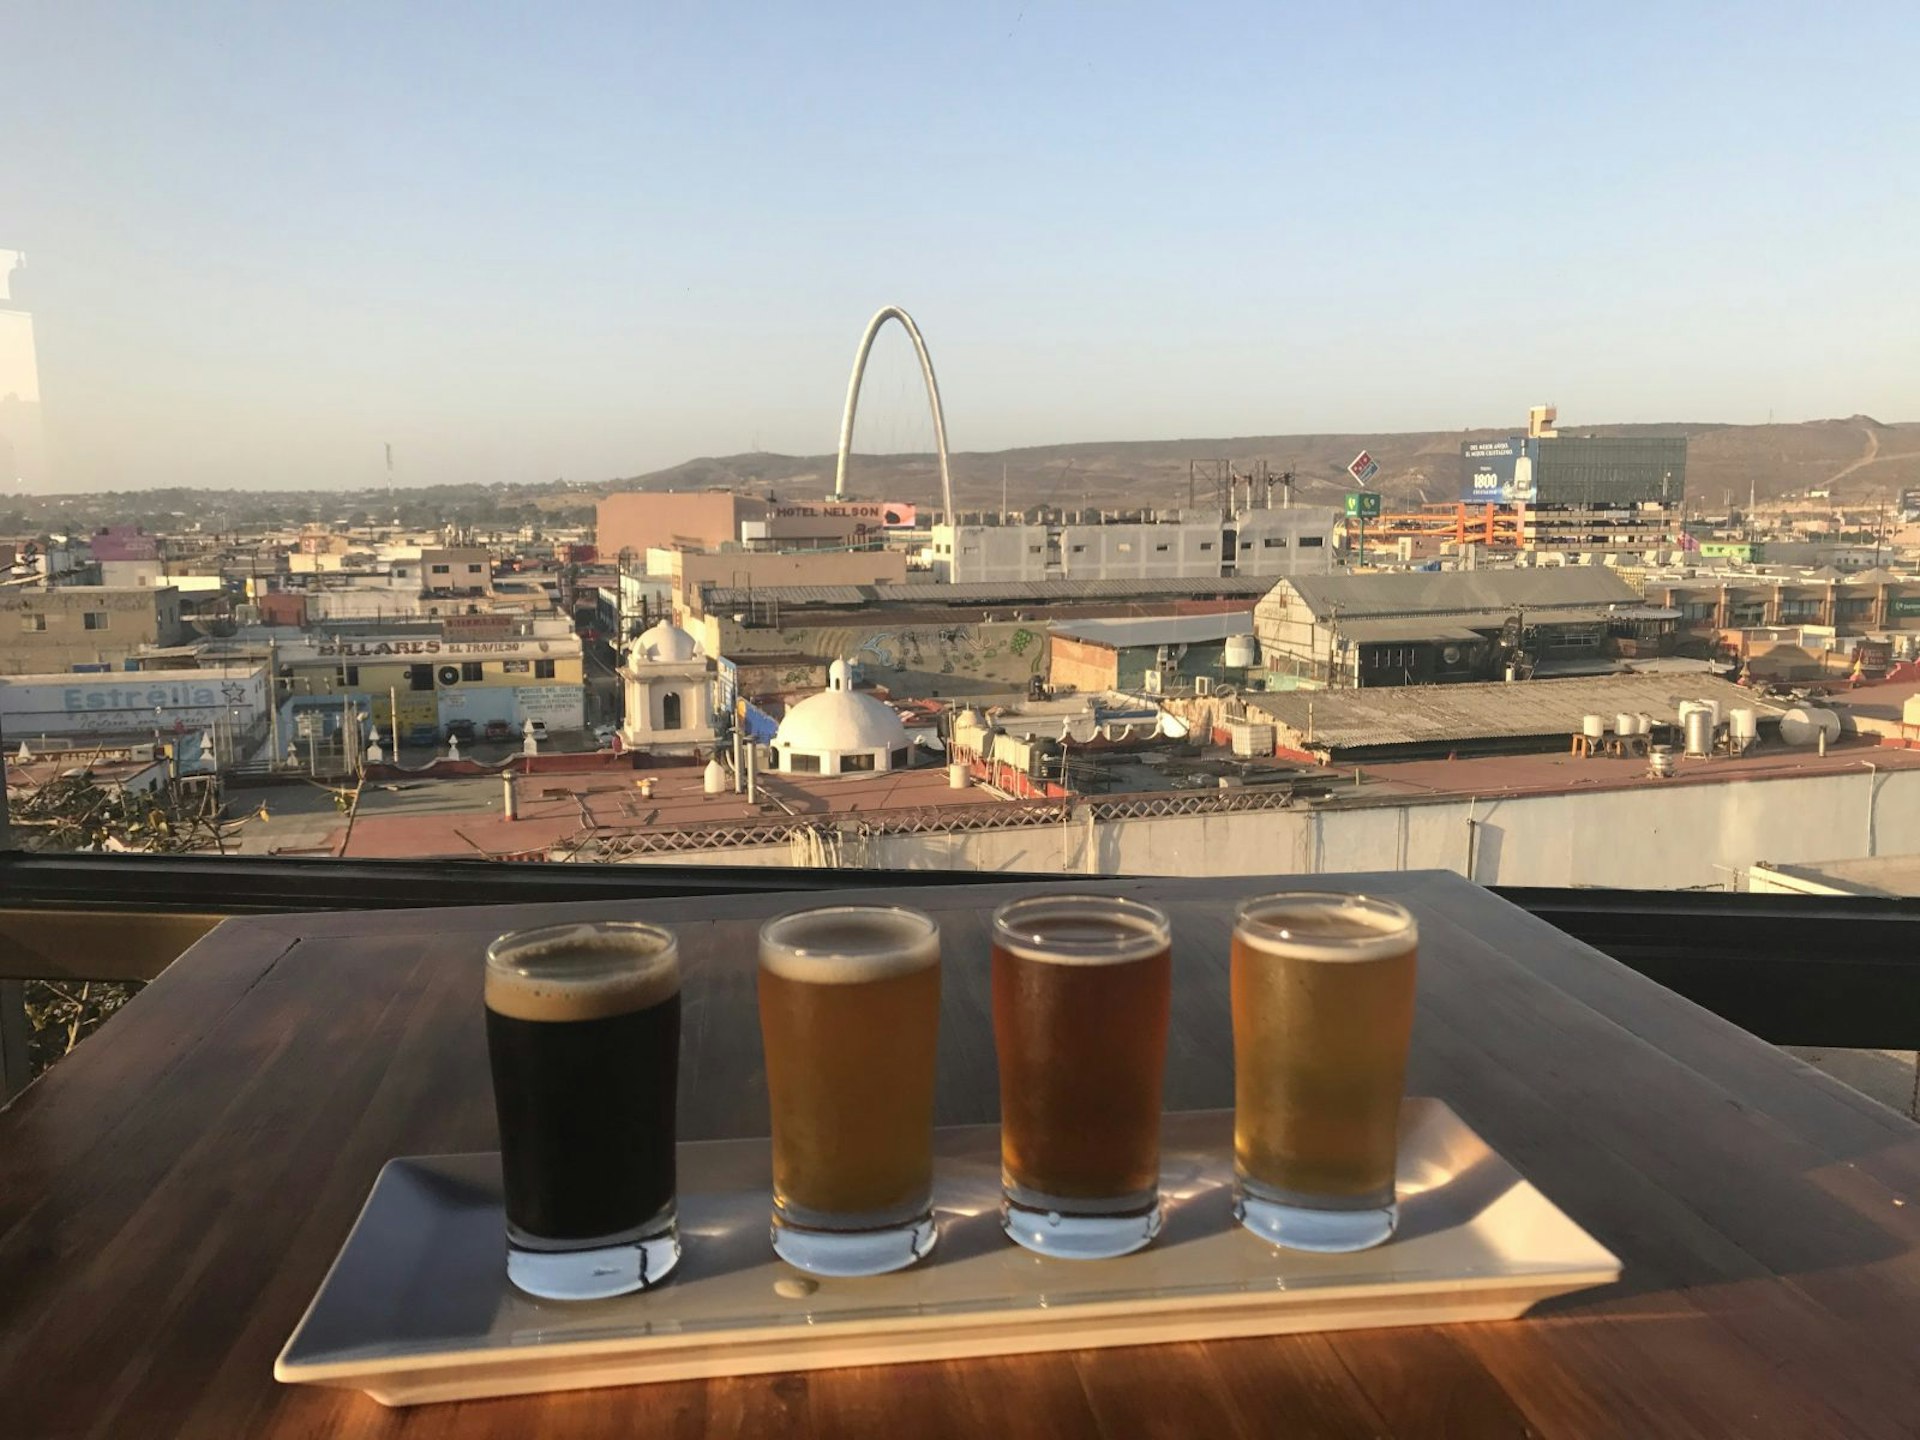 A flight of craft beer sits on a ledge overlooking the city of Tijuana on a clear day © Celeste Brash / Lonely Planet